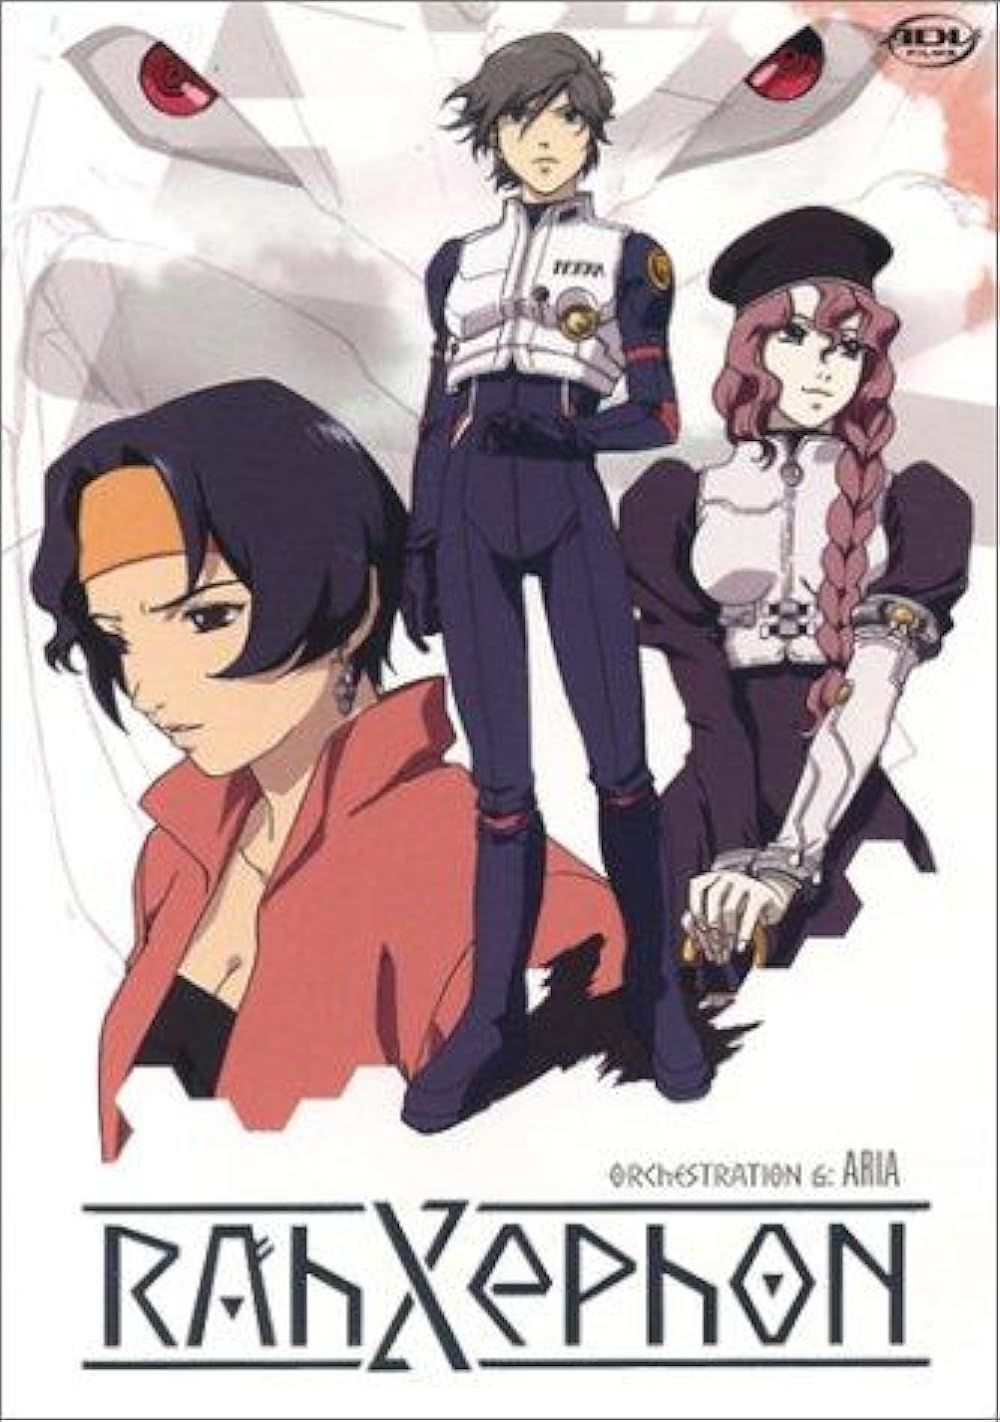 The main trio pose together on the poster for RahXephon